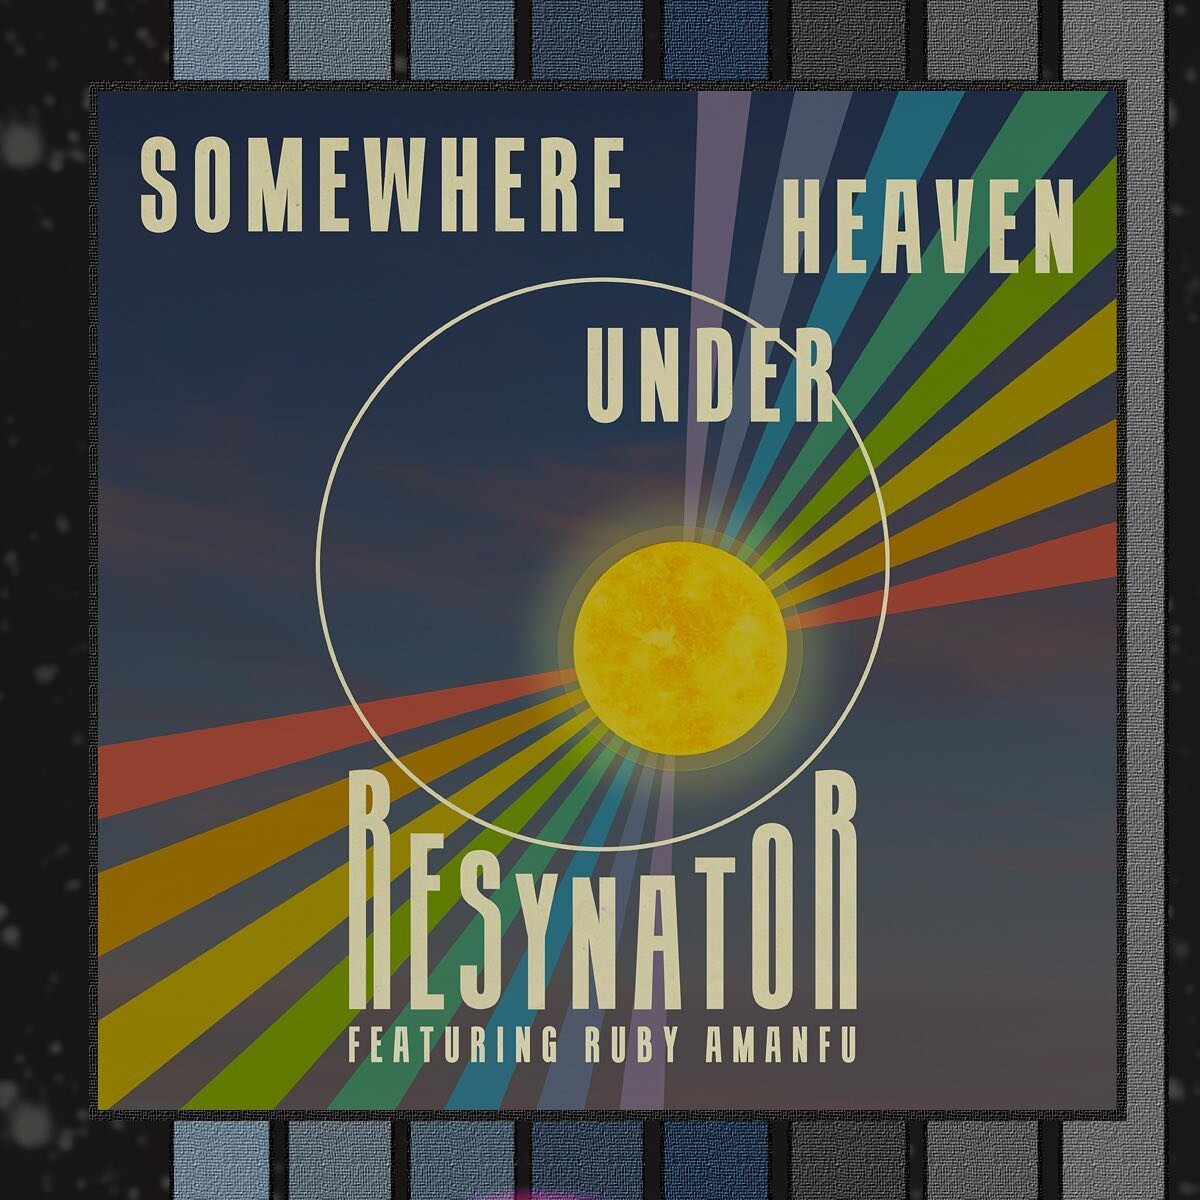 Ready for your new song of the summer? Somewhere Under Heaven is OUT NOW featuring Ruby Amanfu. This is the third and final all-Resynator Tom Petty cover and I wanted to go out with a bang. I love Ruby so much. Her voice just soars through this song 